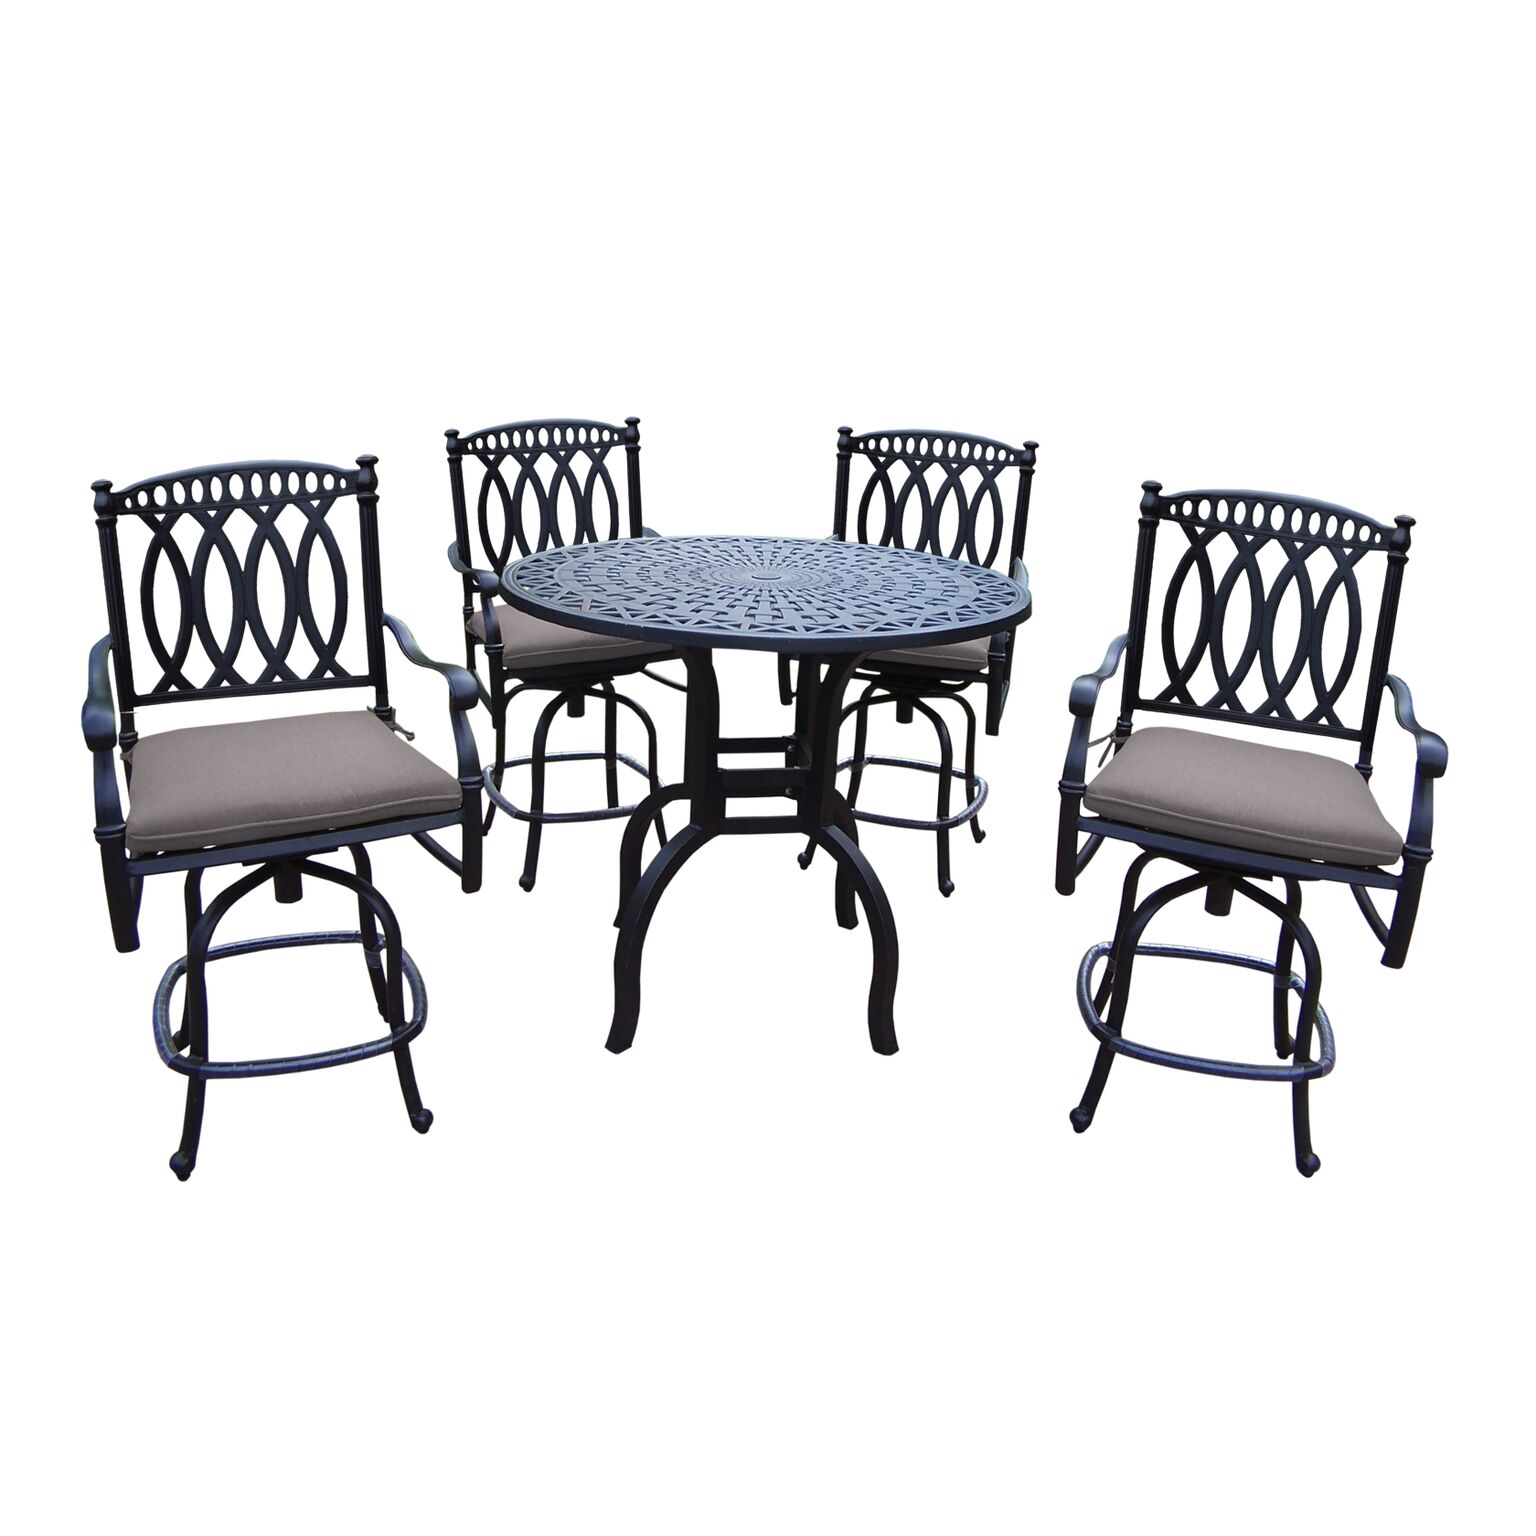 Outdoor Living and Style 5-Piece Black Round Outdoor Patio Bar Set - Gray Cushions - image 1 of 3